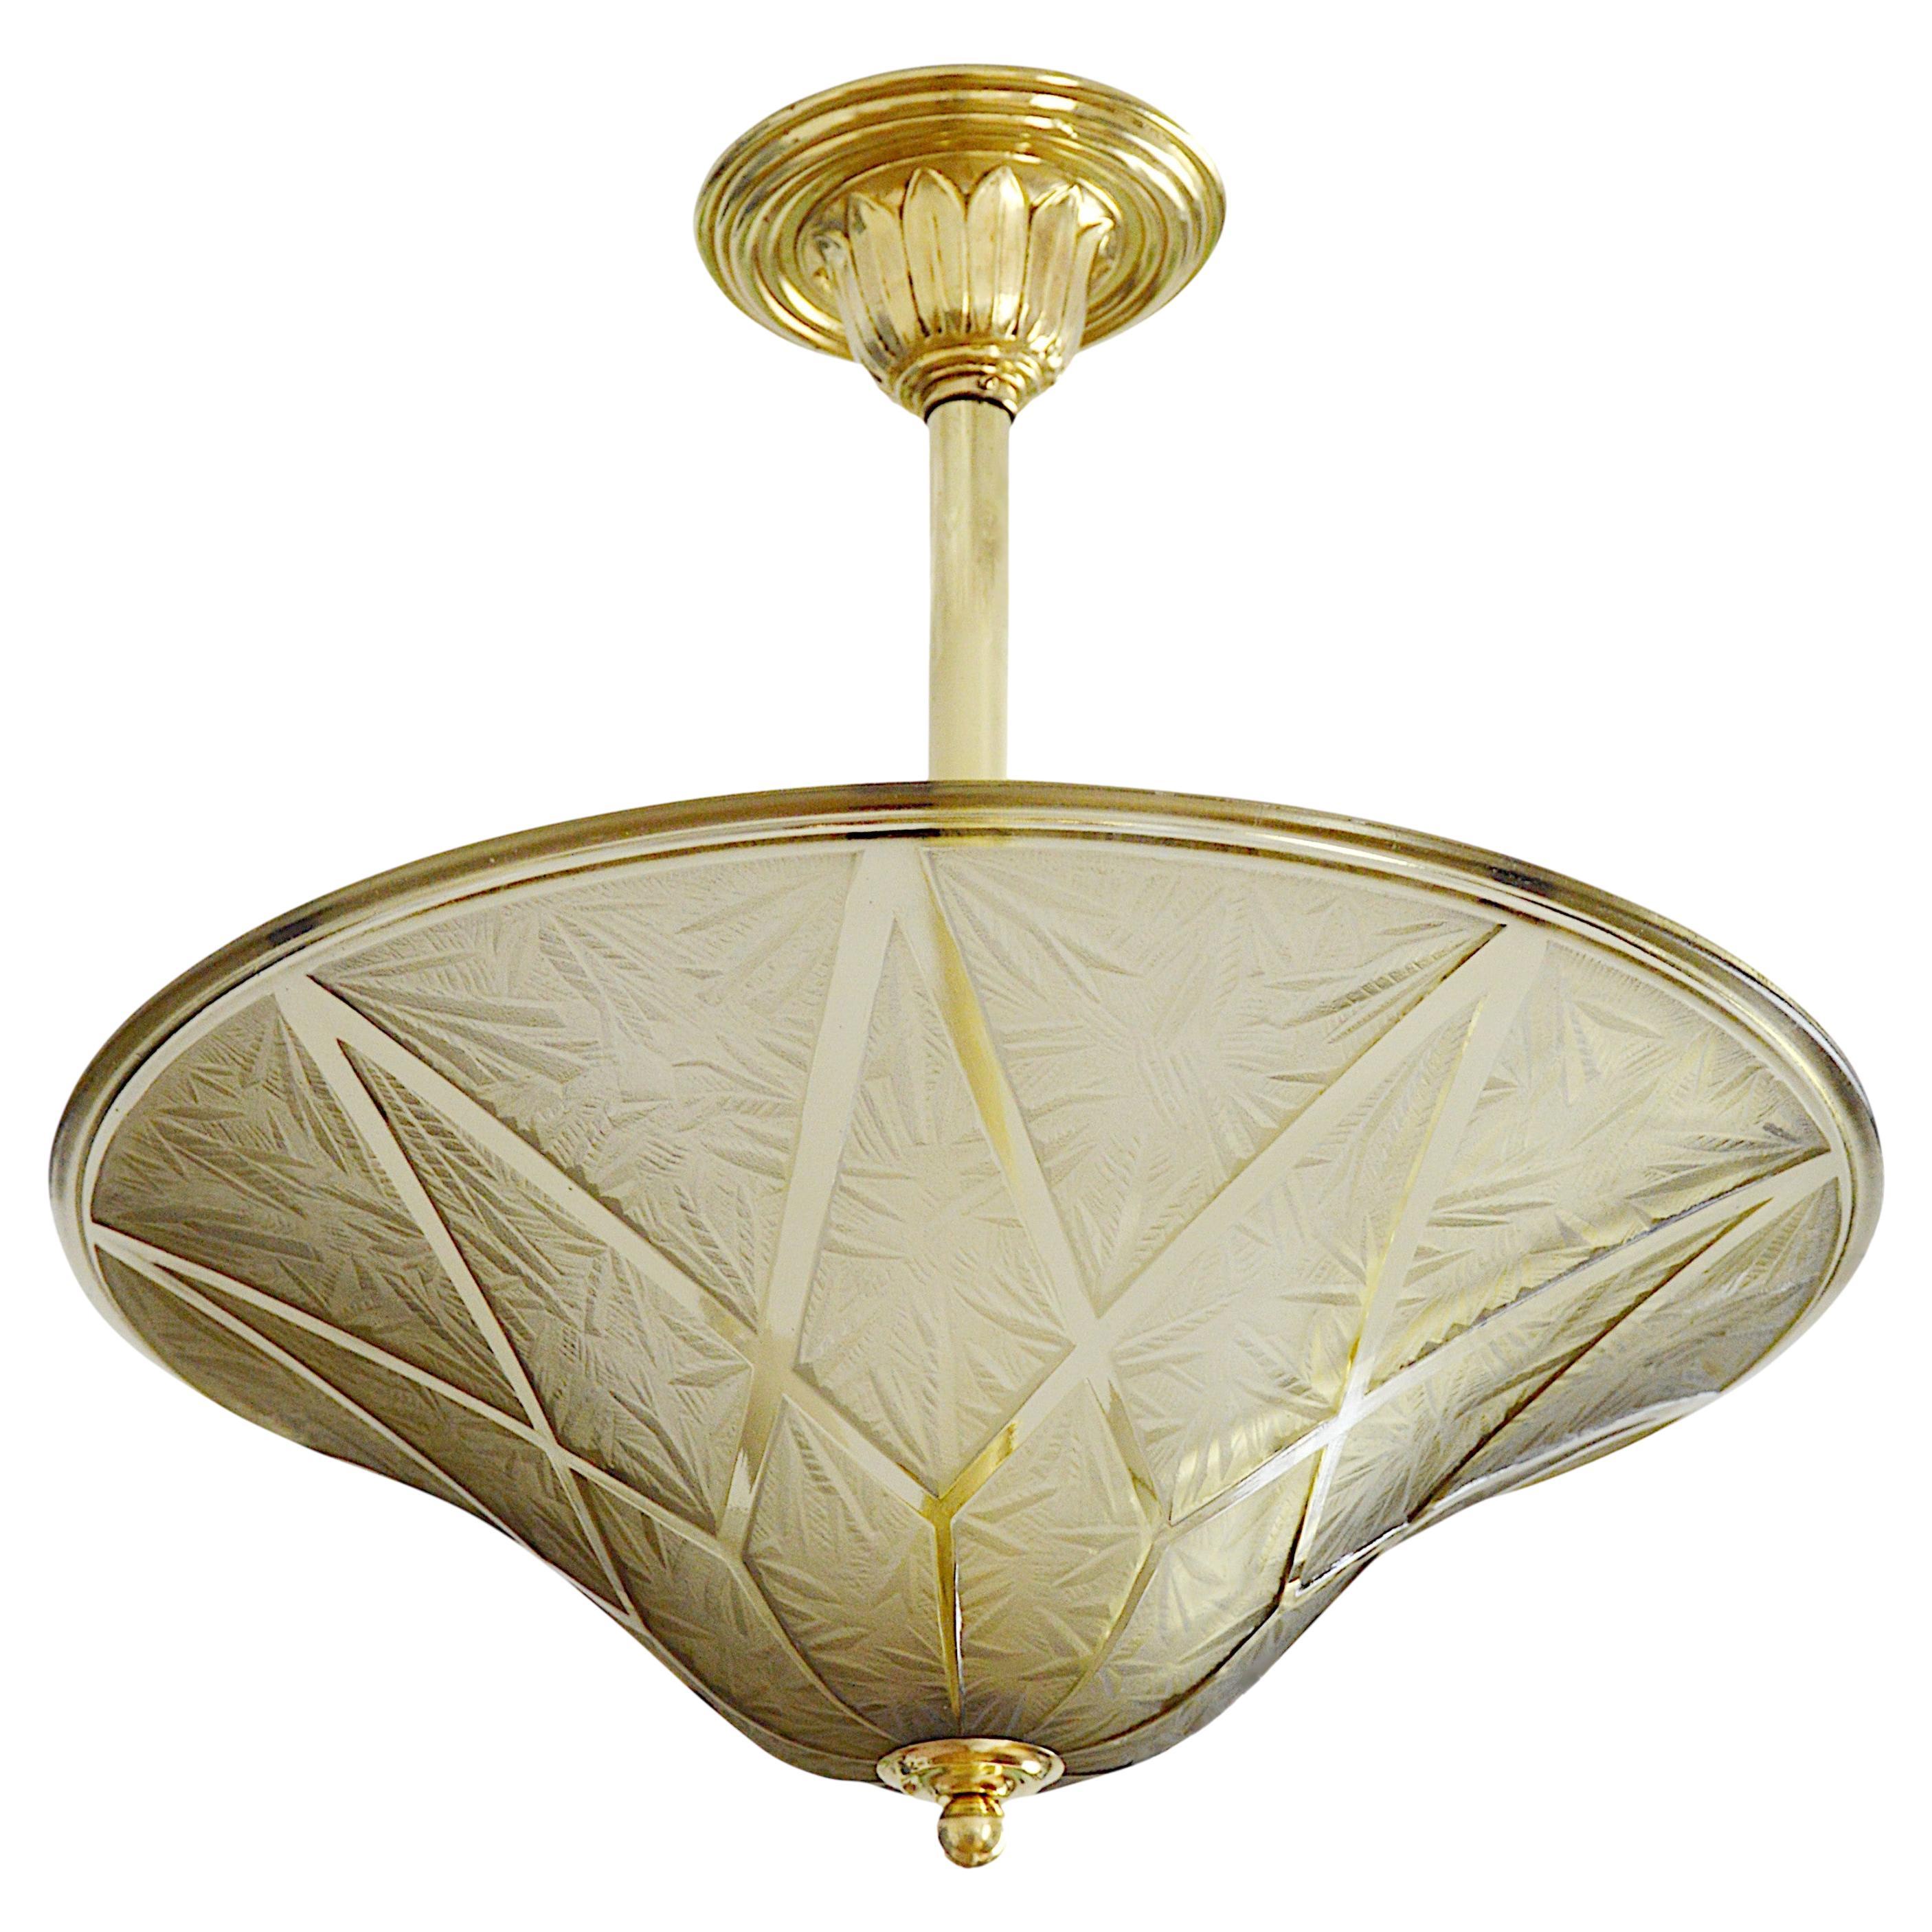 Georges Beal at Verlys French Art Deco Pendant Chandelier, Late 1920s For Sale